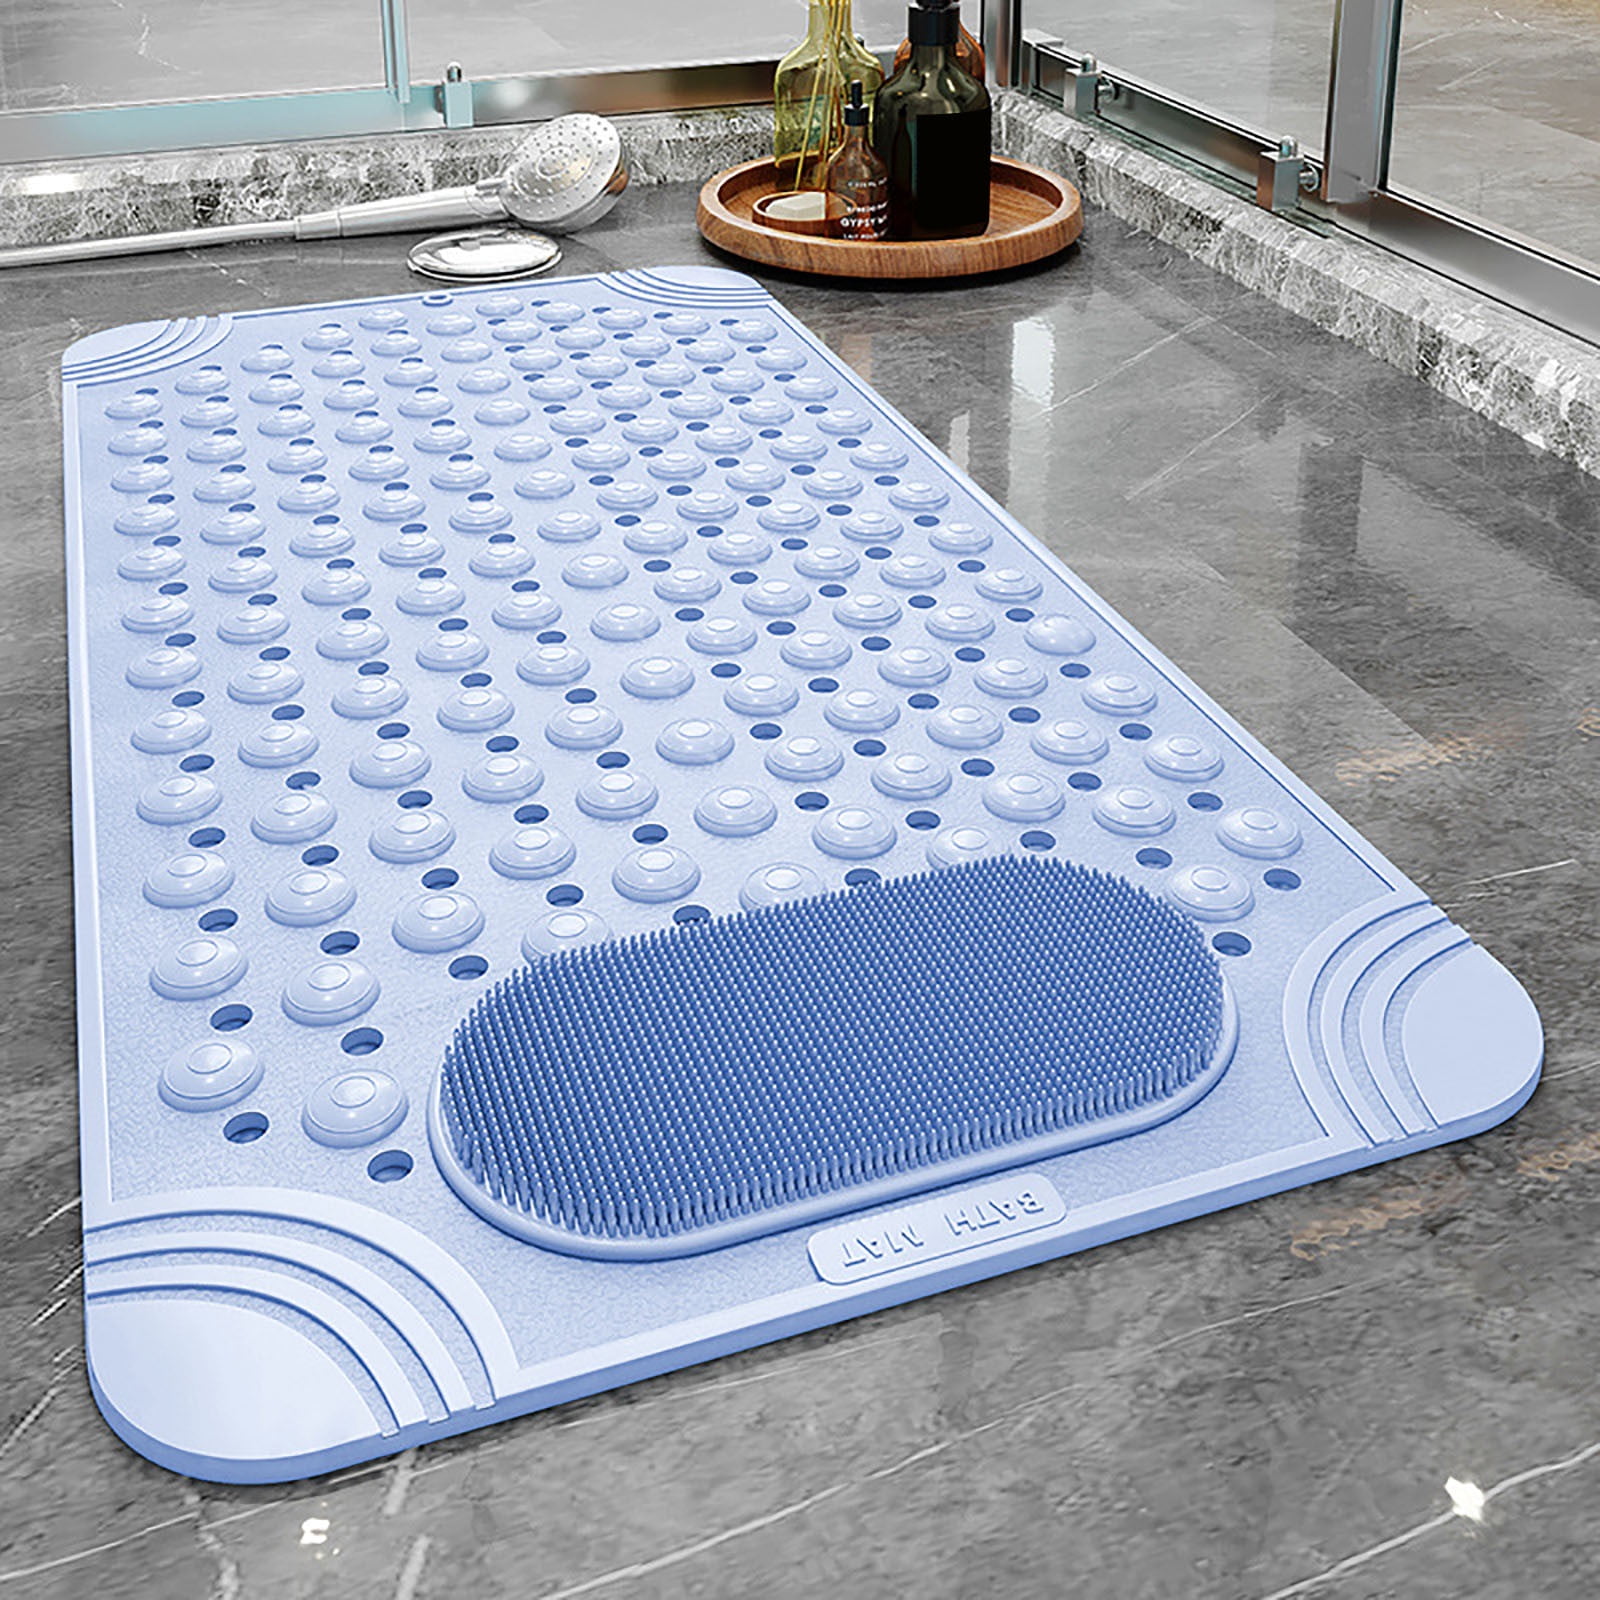 Yolife Shower Foot Scrubber Mat, Anti-Slip Bath Mat with Scrub Bristles,  Soft Shower Foot Massager with Strong Suction Cups for Soothe Achy Feet